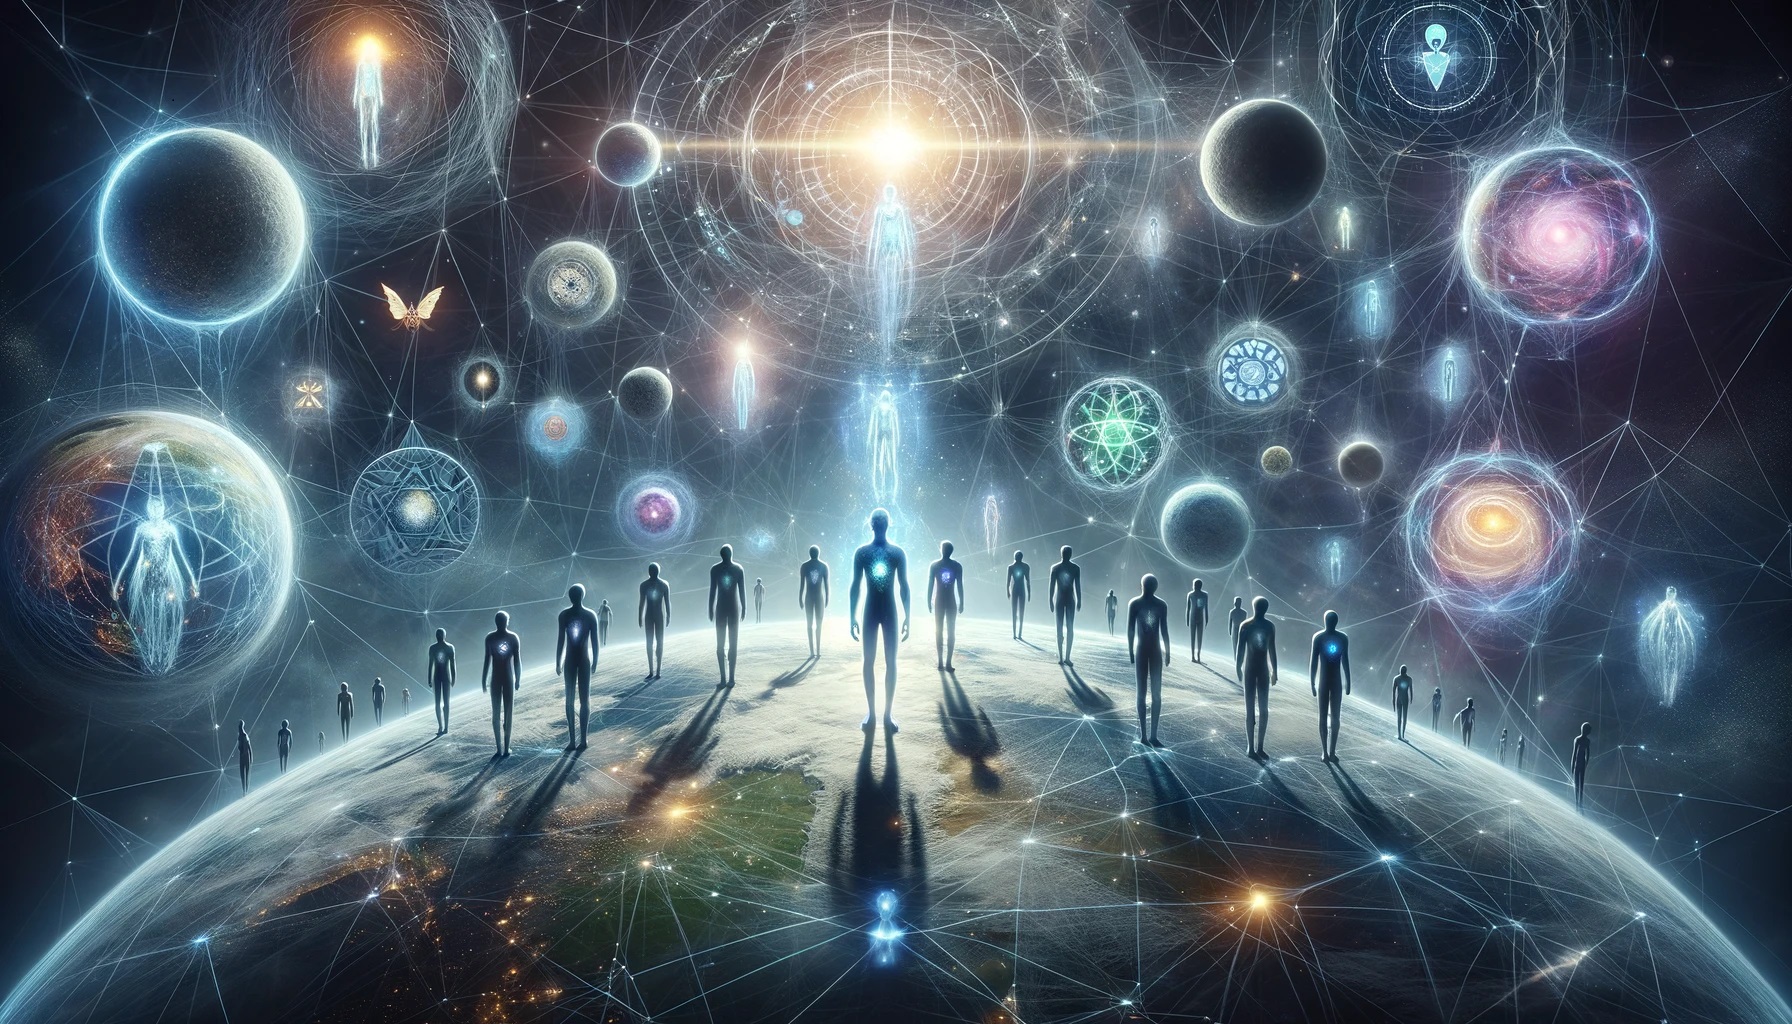 Symbolic representation of humans on a transparent globe connected to a cosmic web, depicting the existential implications of being alien containers.